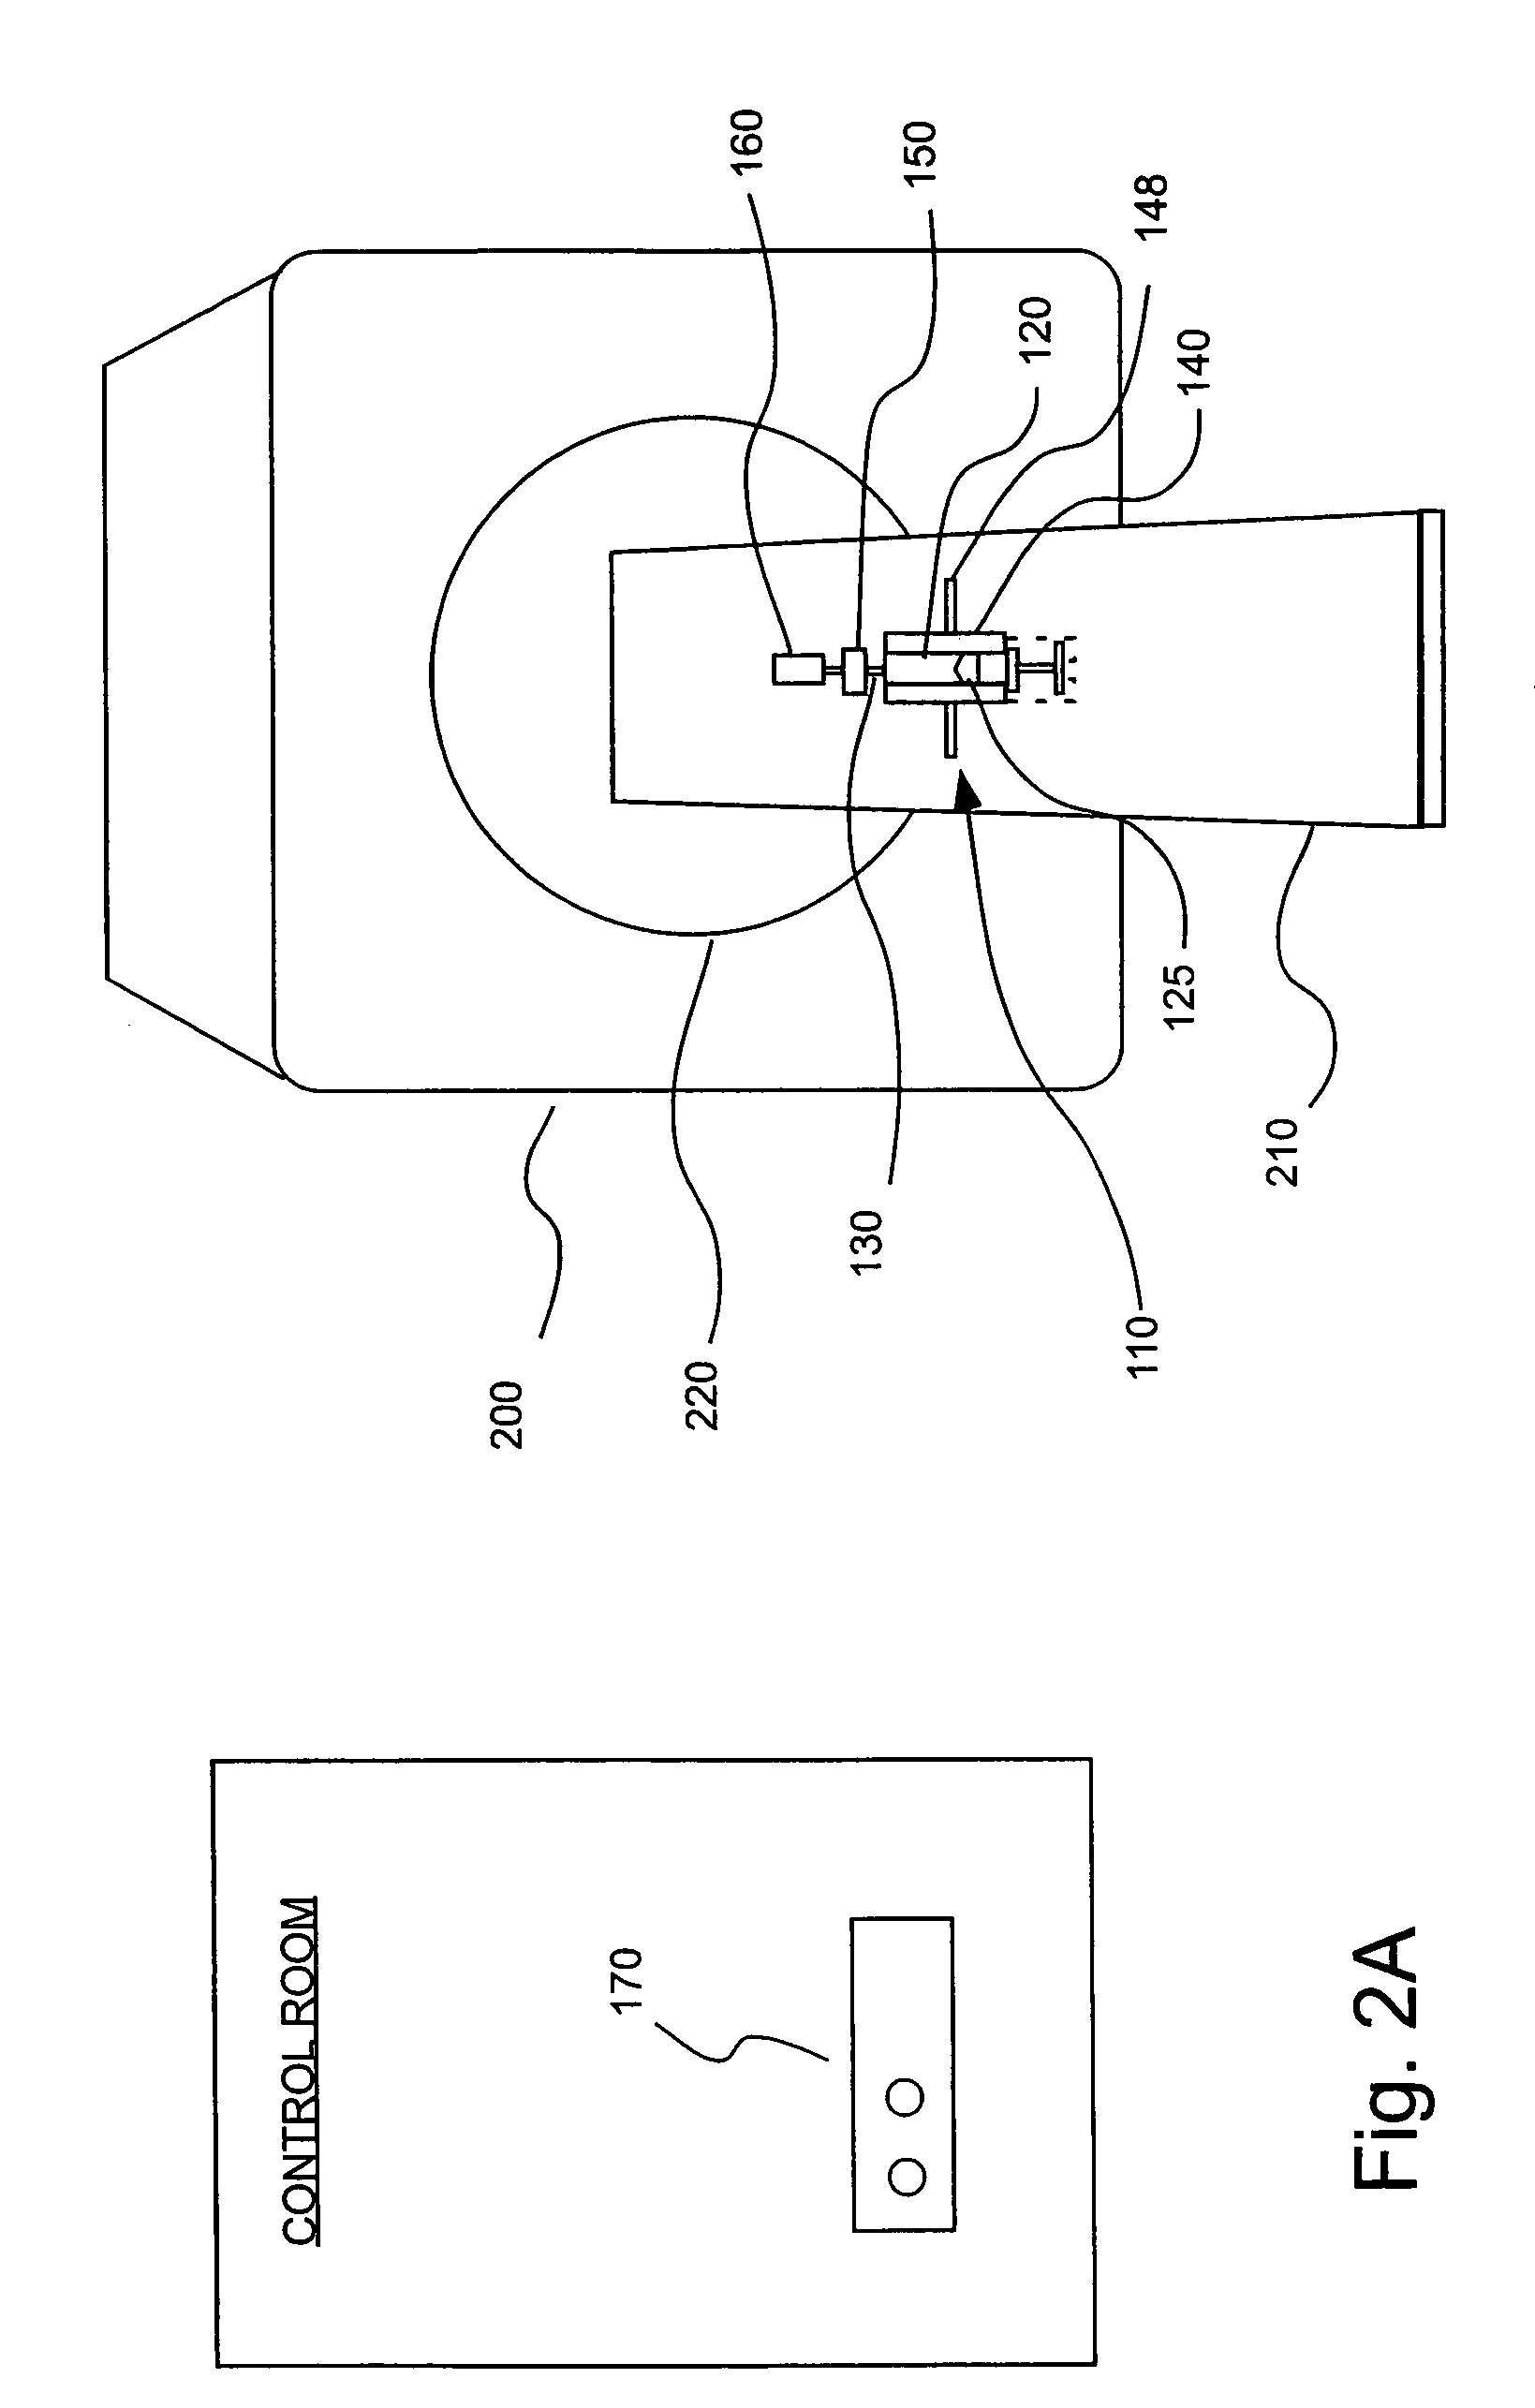 Devices, systems and methods for delivery of a fluid into a patient during a magnetic resonance procedure